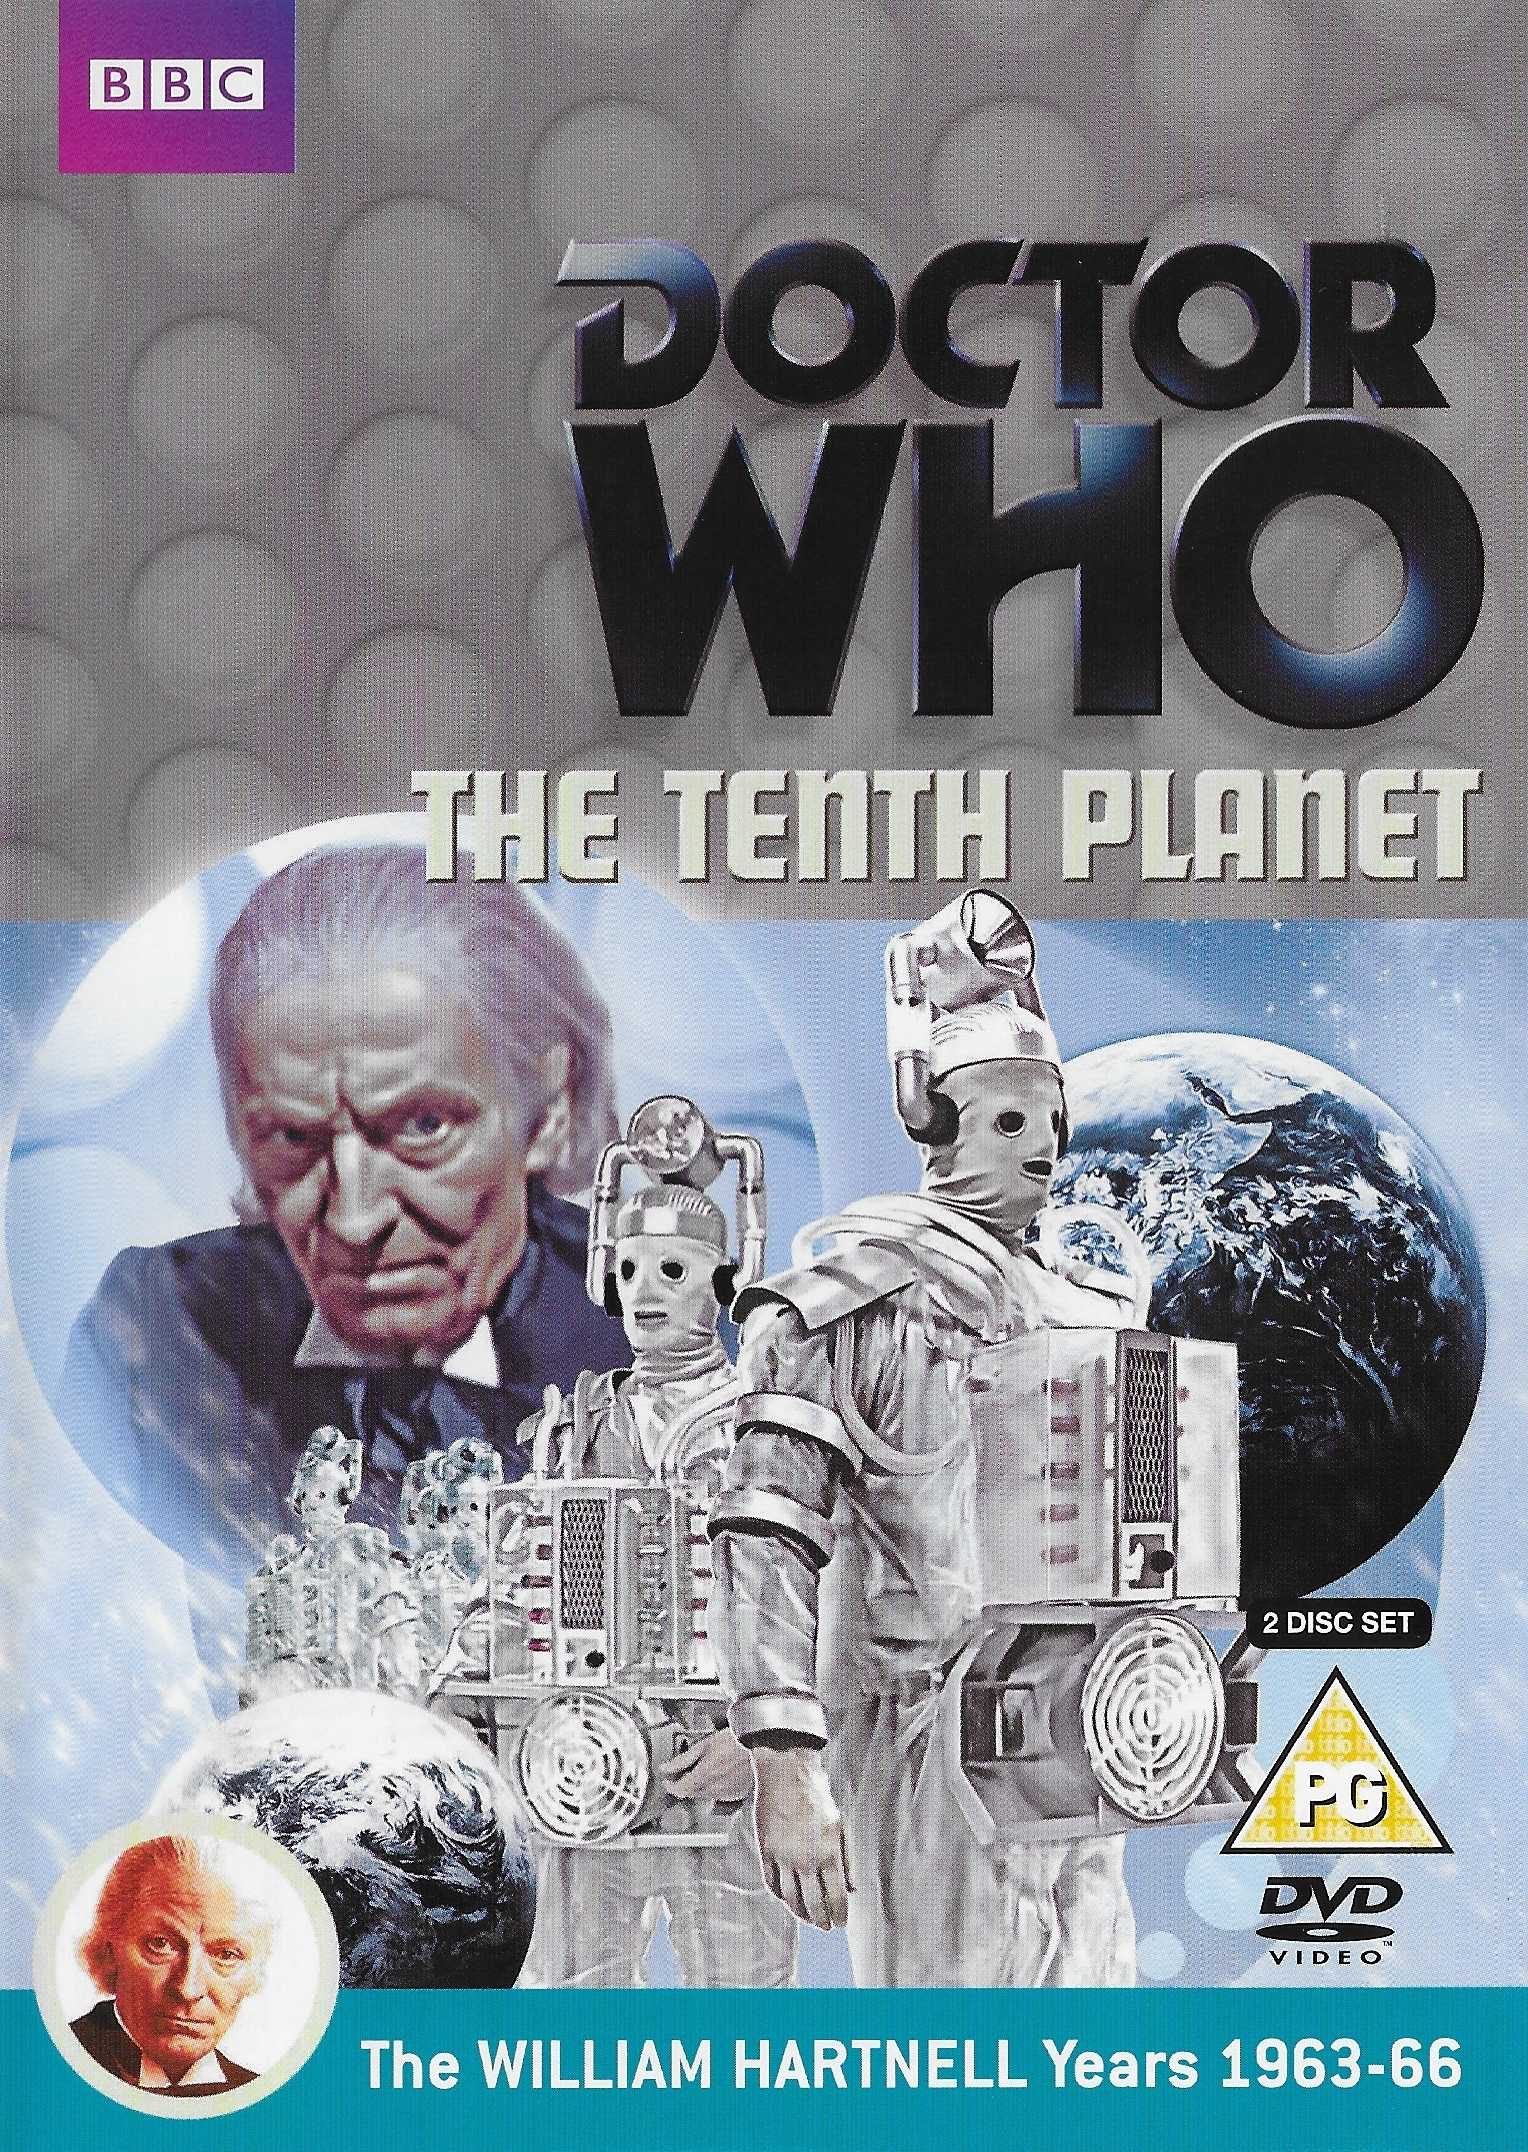 Picture of BBCDVD 3382 Doctor Who - The tenth planet by artist Kit Pedler / Gerry Davis from the BBC dvds - Records and Tapes library